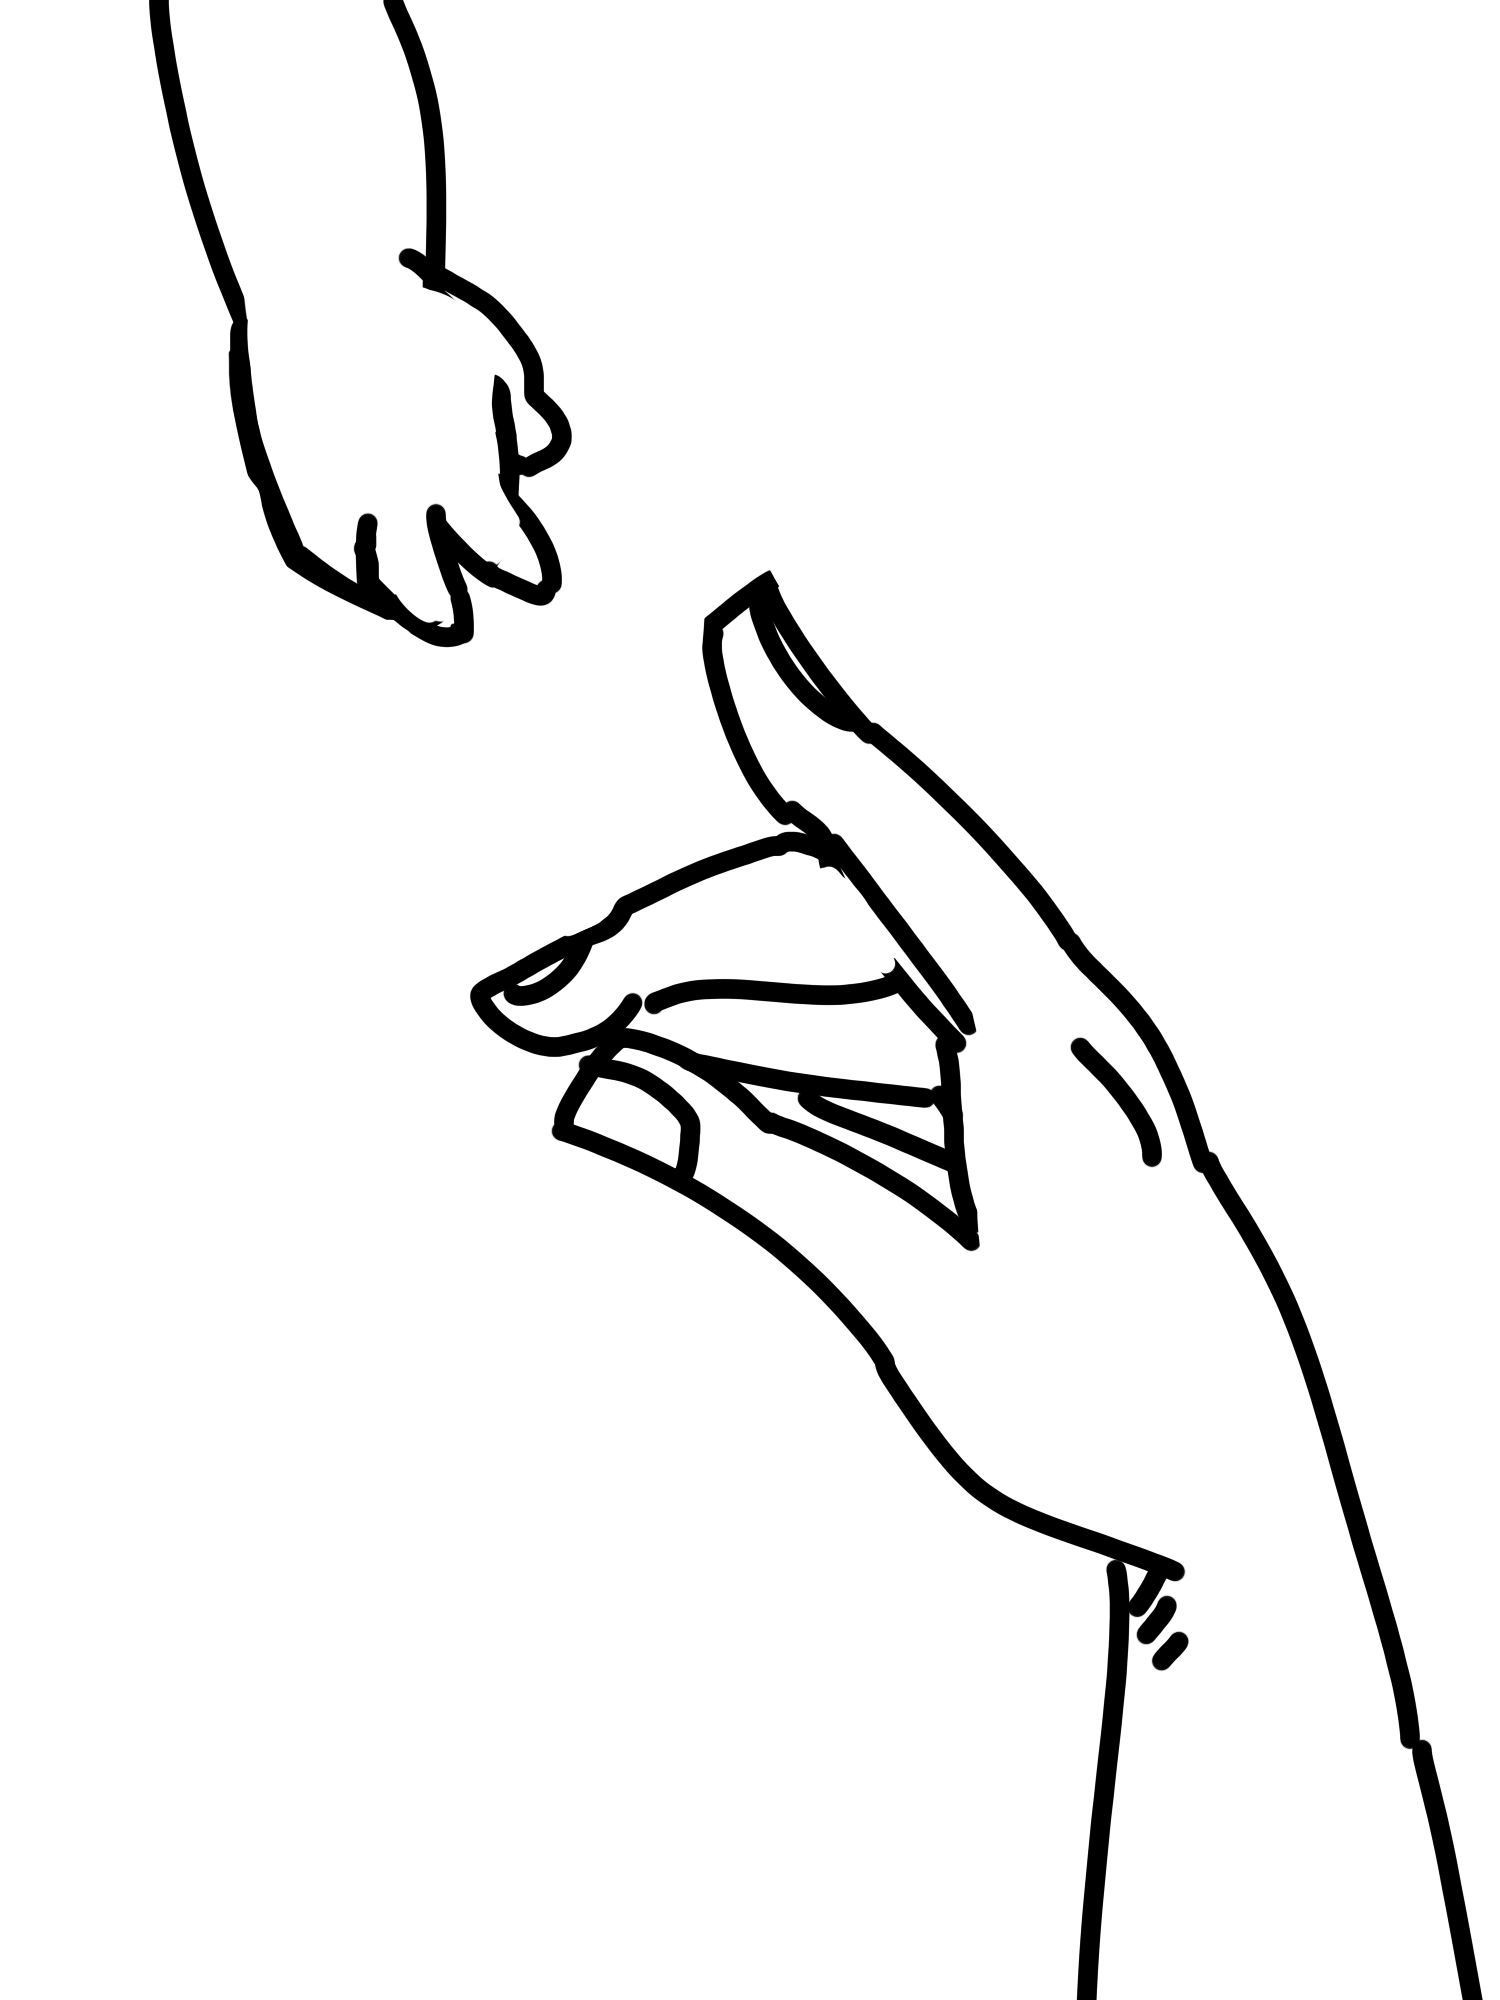 In a black and white outline style. Two arms reaching out to each other. The arm on the bottom is that of an adult while the arm on the top is that of a baby's.